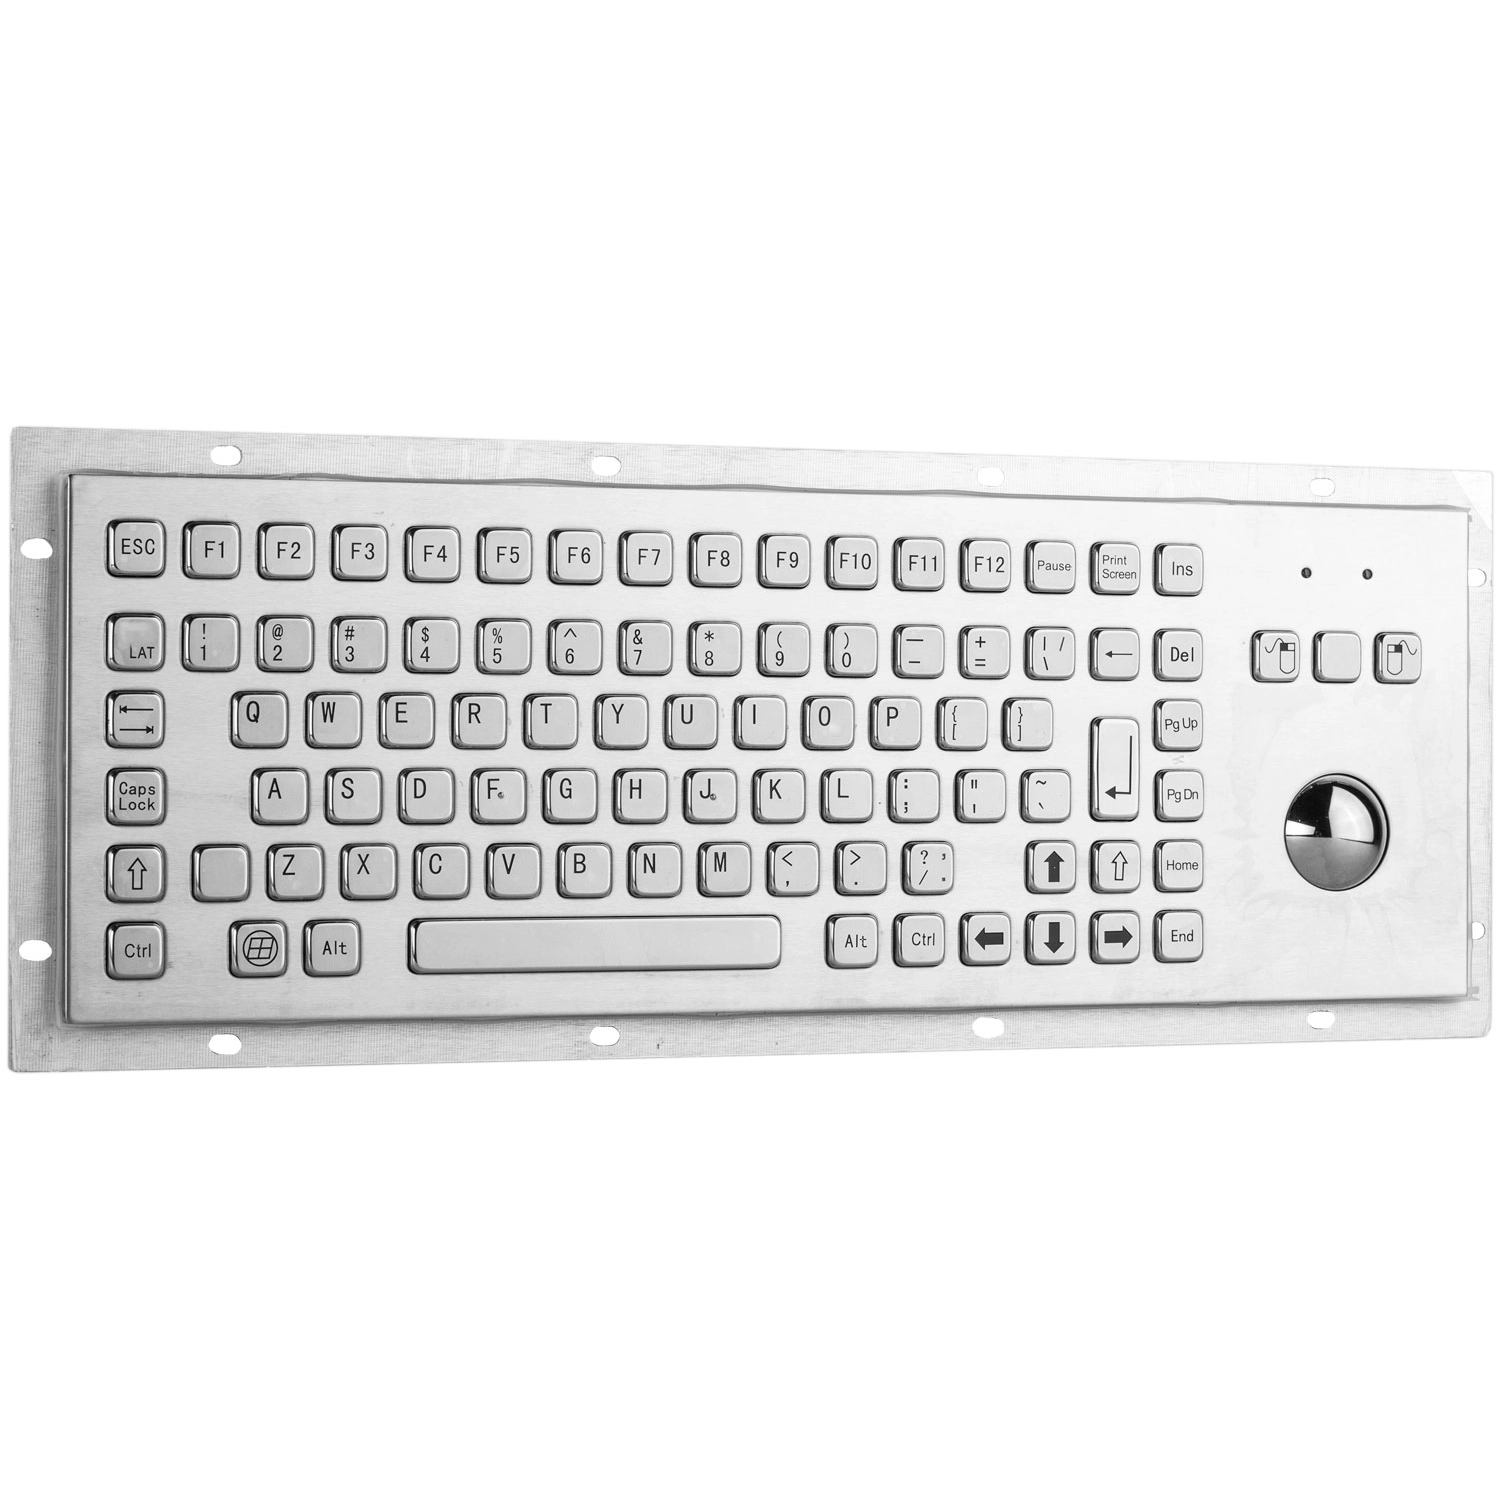 Rugged panel mount keyboard with trackball KB-000-NW0S0T7